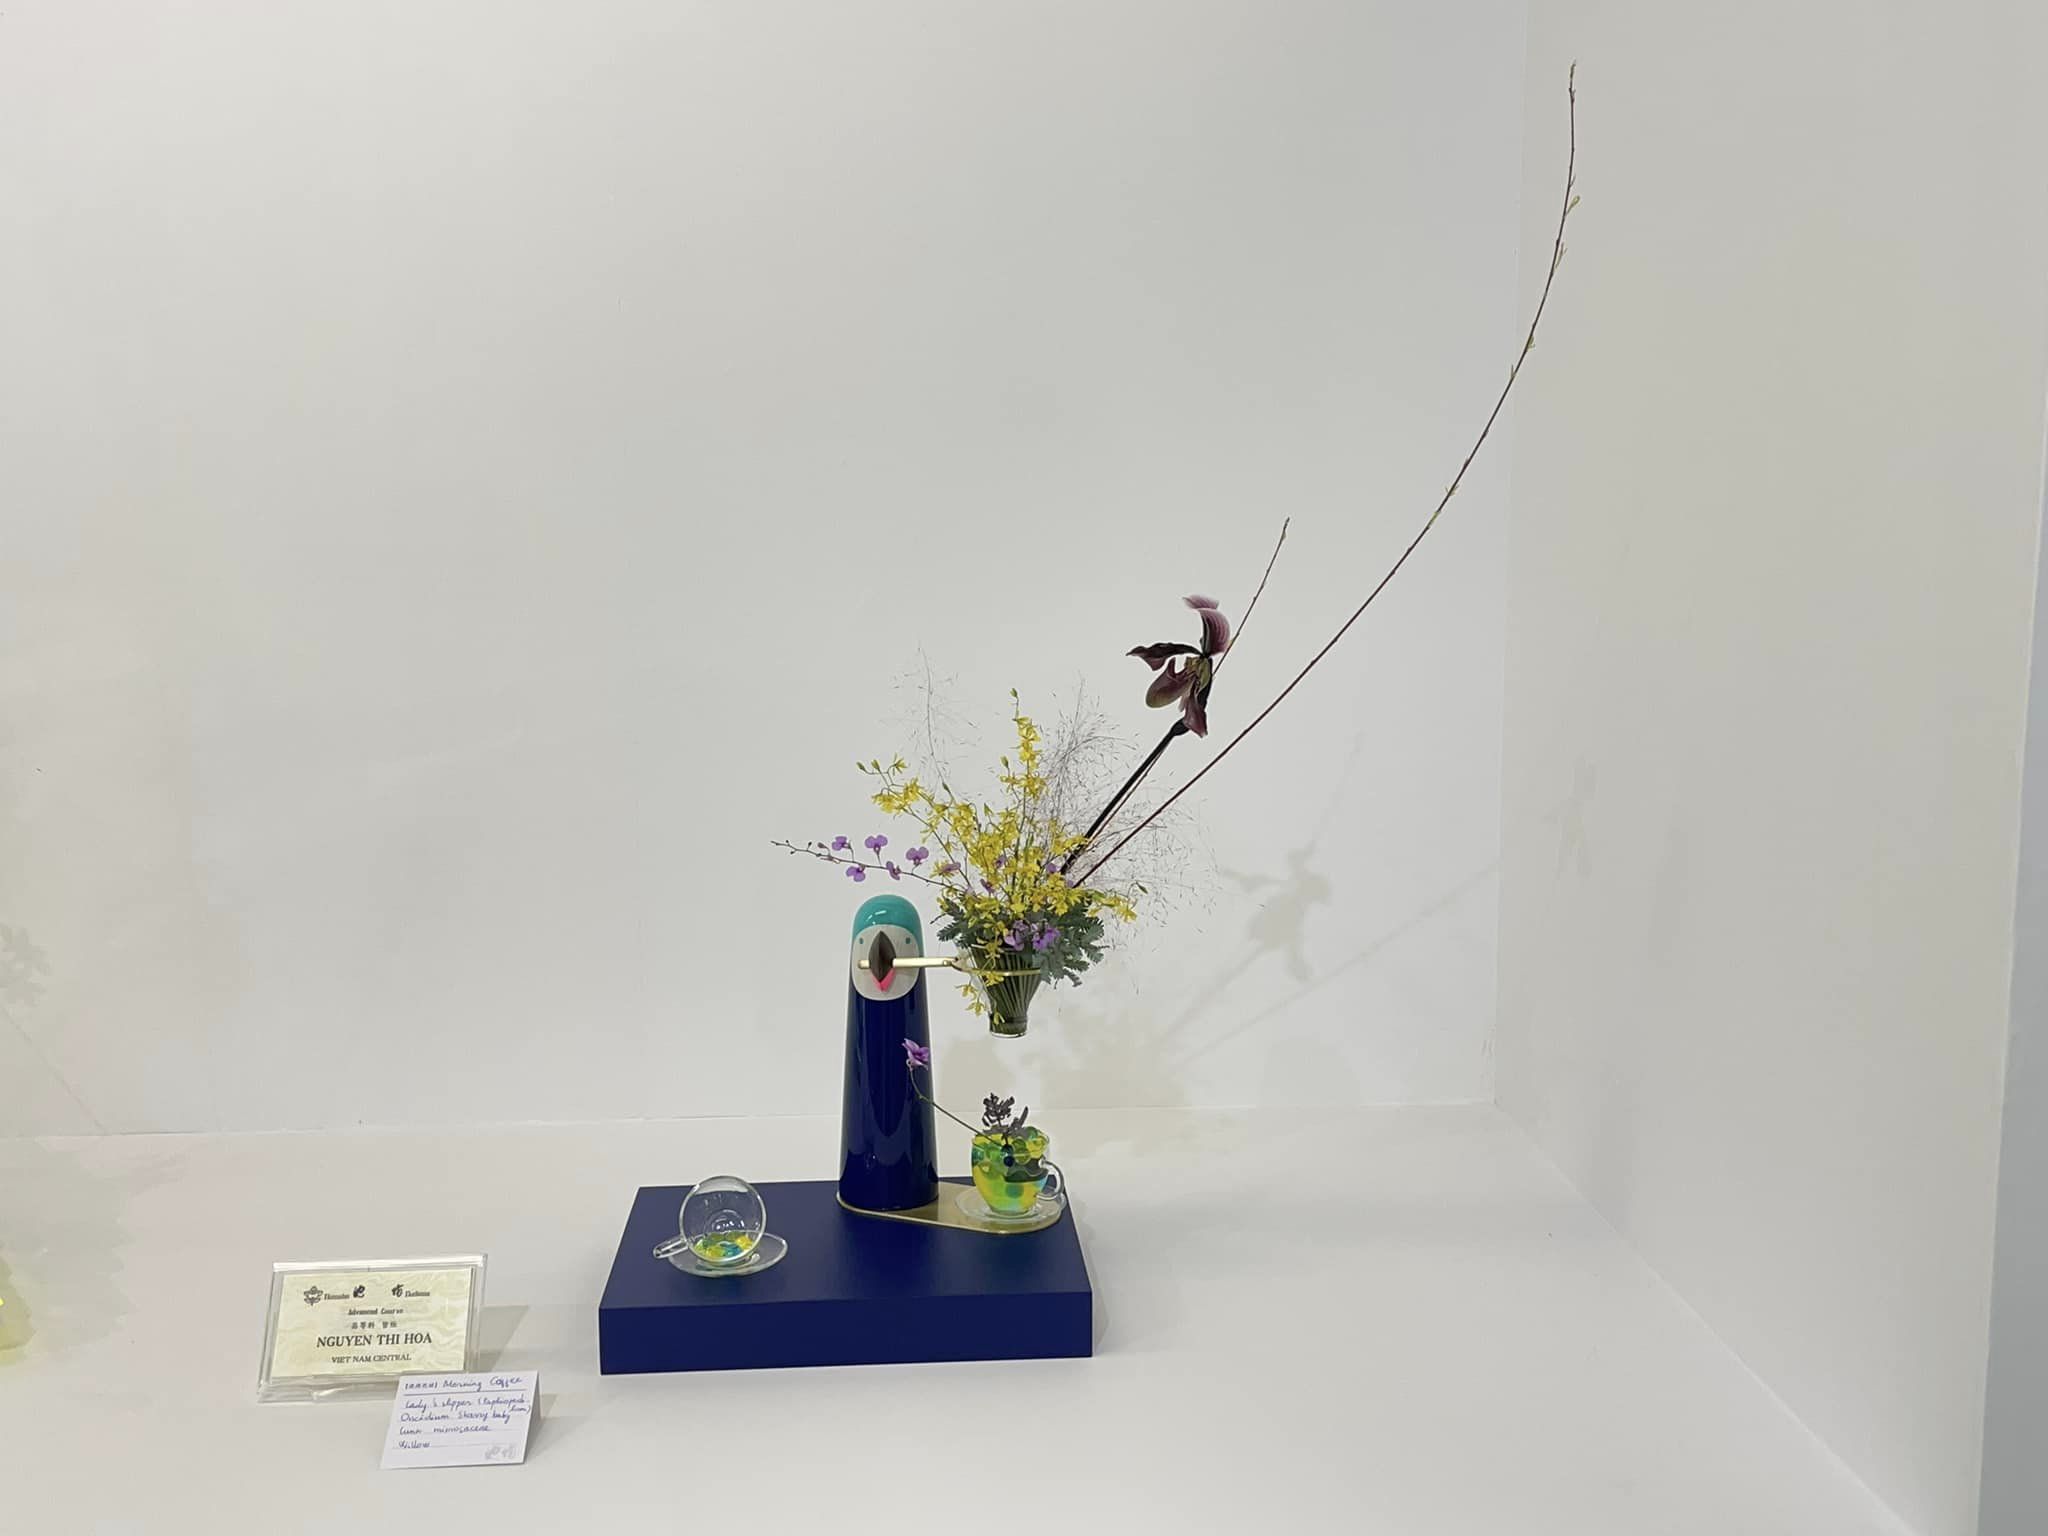 This supplied photo shows a flower arrangement created by a Vietnamese Ikebana practitioner on display at the 2022 Ikenobo Autumn Tanabata Exhibition in Kyoto, Japan.